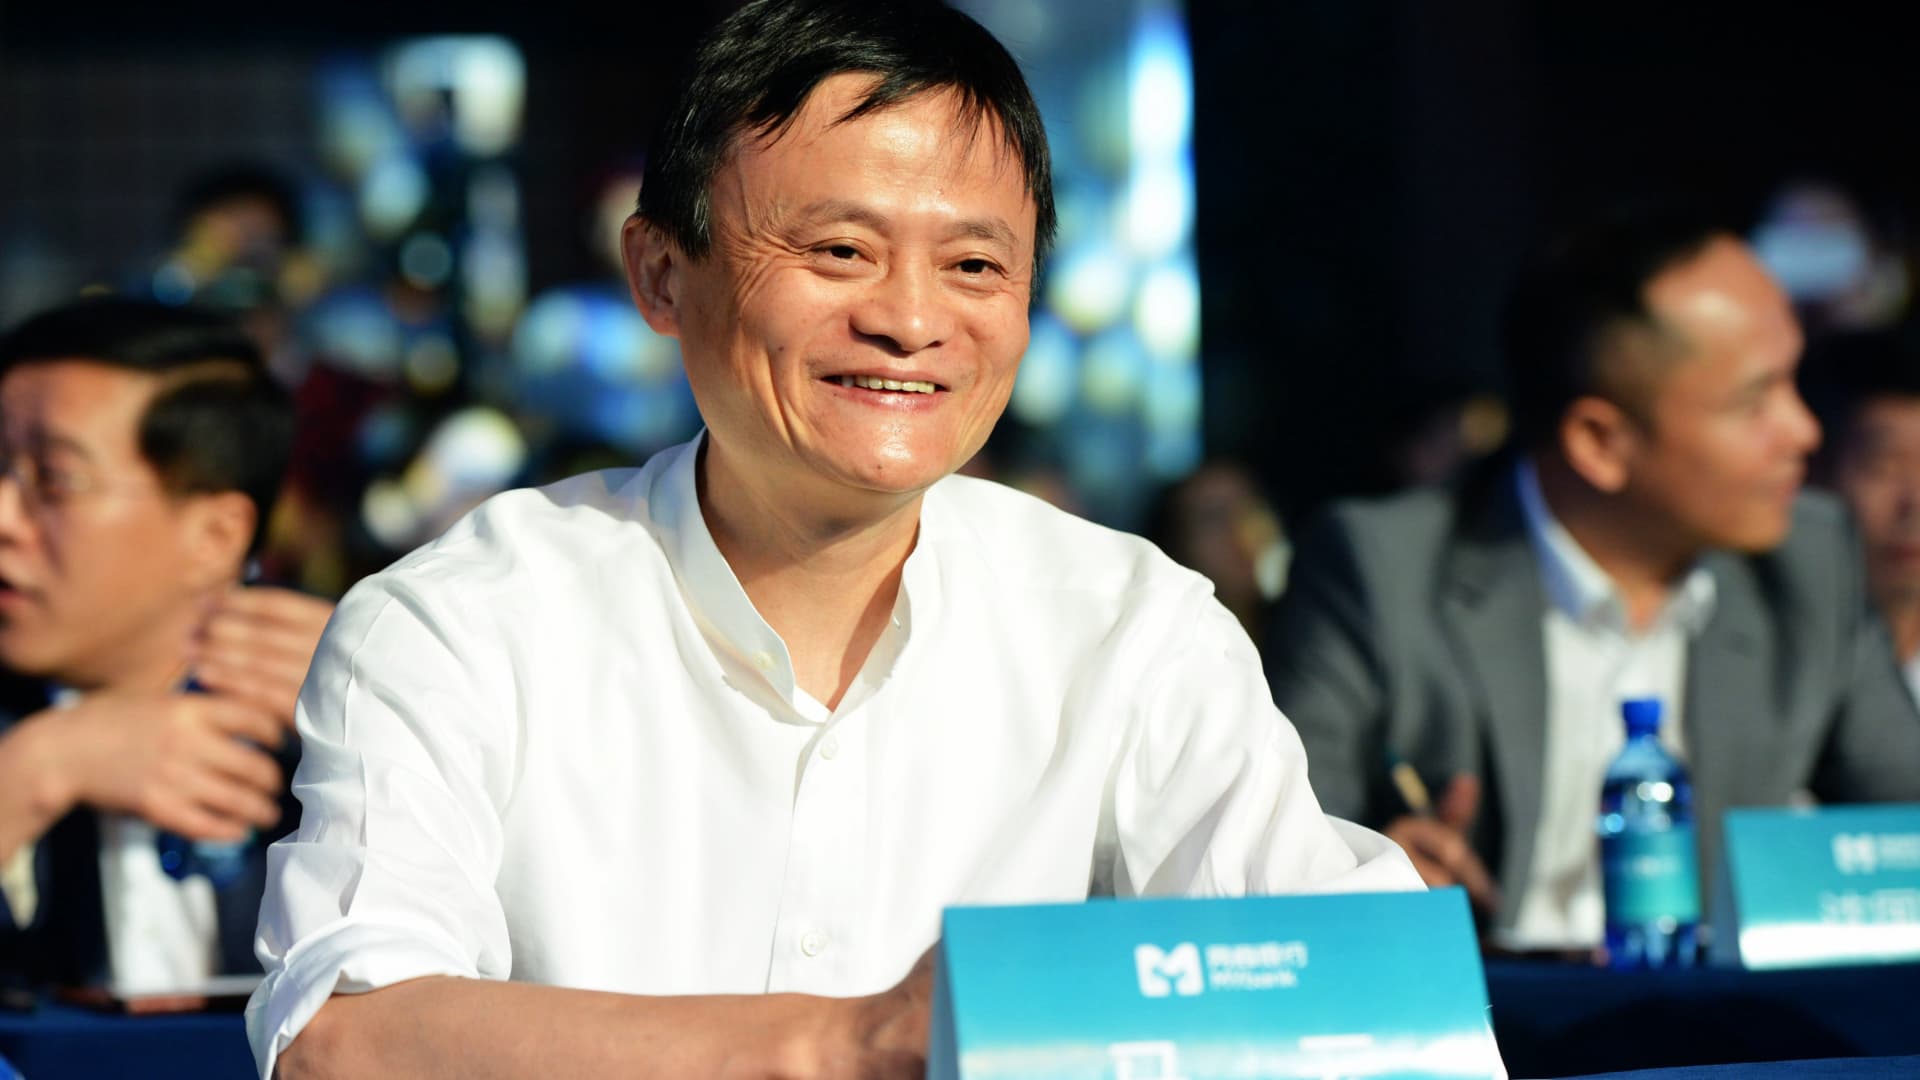 Alibaba founder Jack Ma is ‘alive’ and ‘happy,’ top exec says after China’s tech crackdown